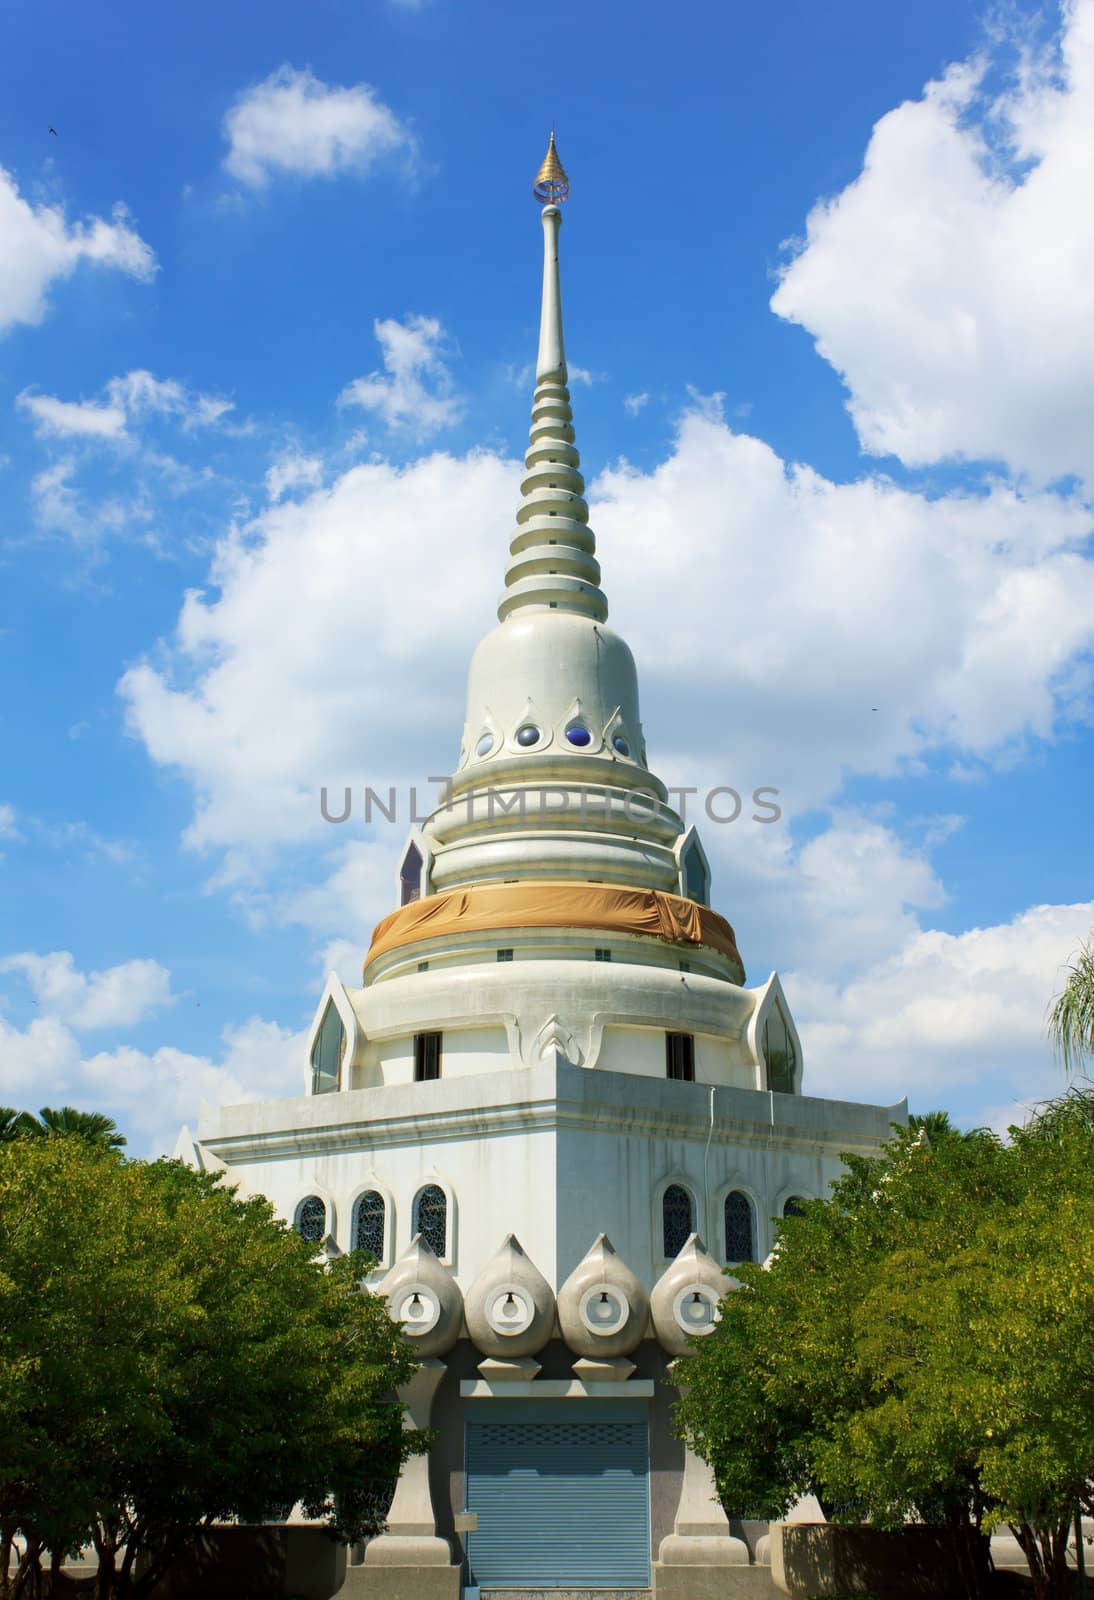  temple in thailand  on the blue sky texture background.  by singkamc